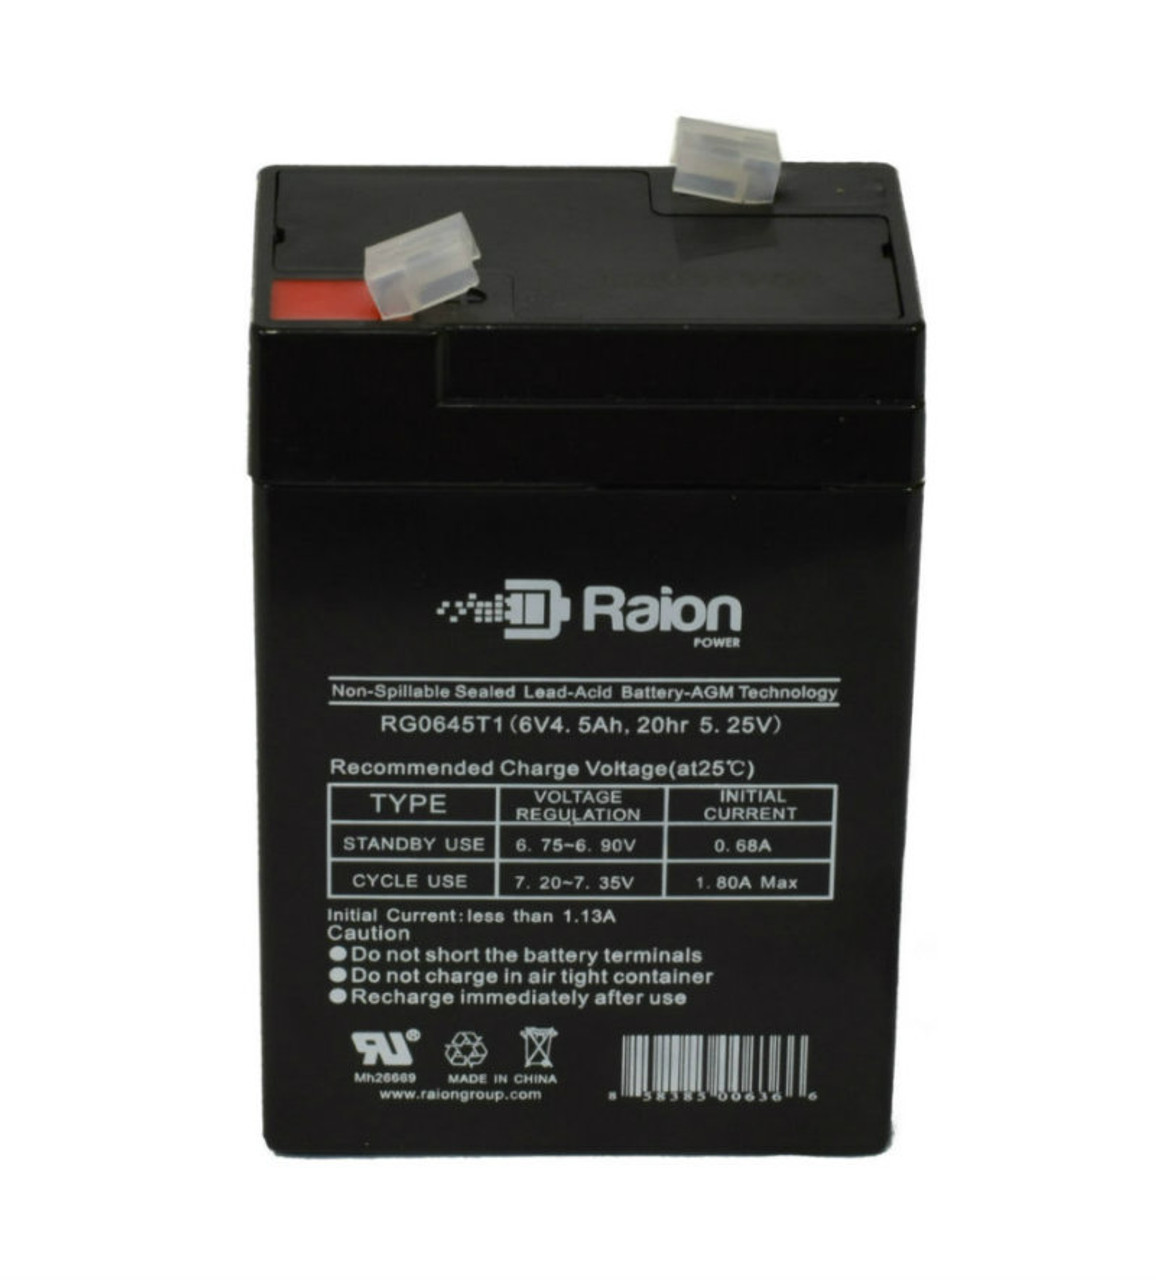 Raion Power RG0645T1 Replacement Battery Cartridge for Criticare Systems 504 Pulse Oximeter